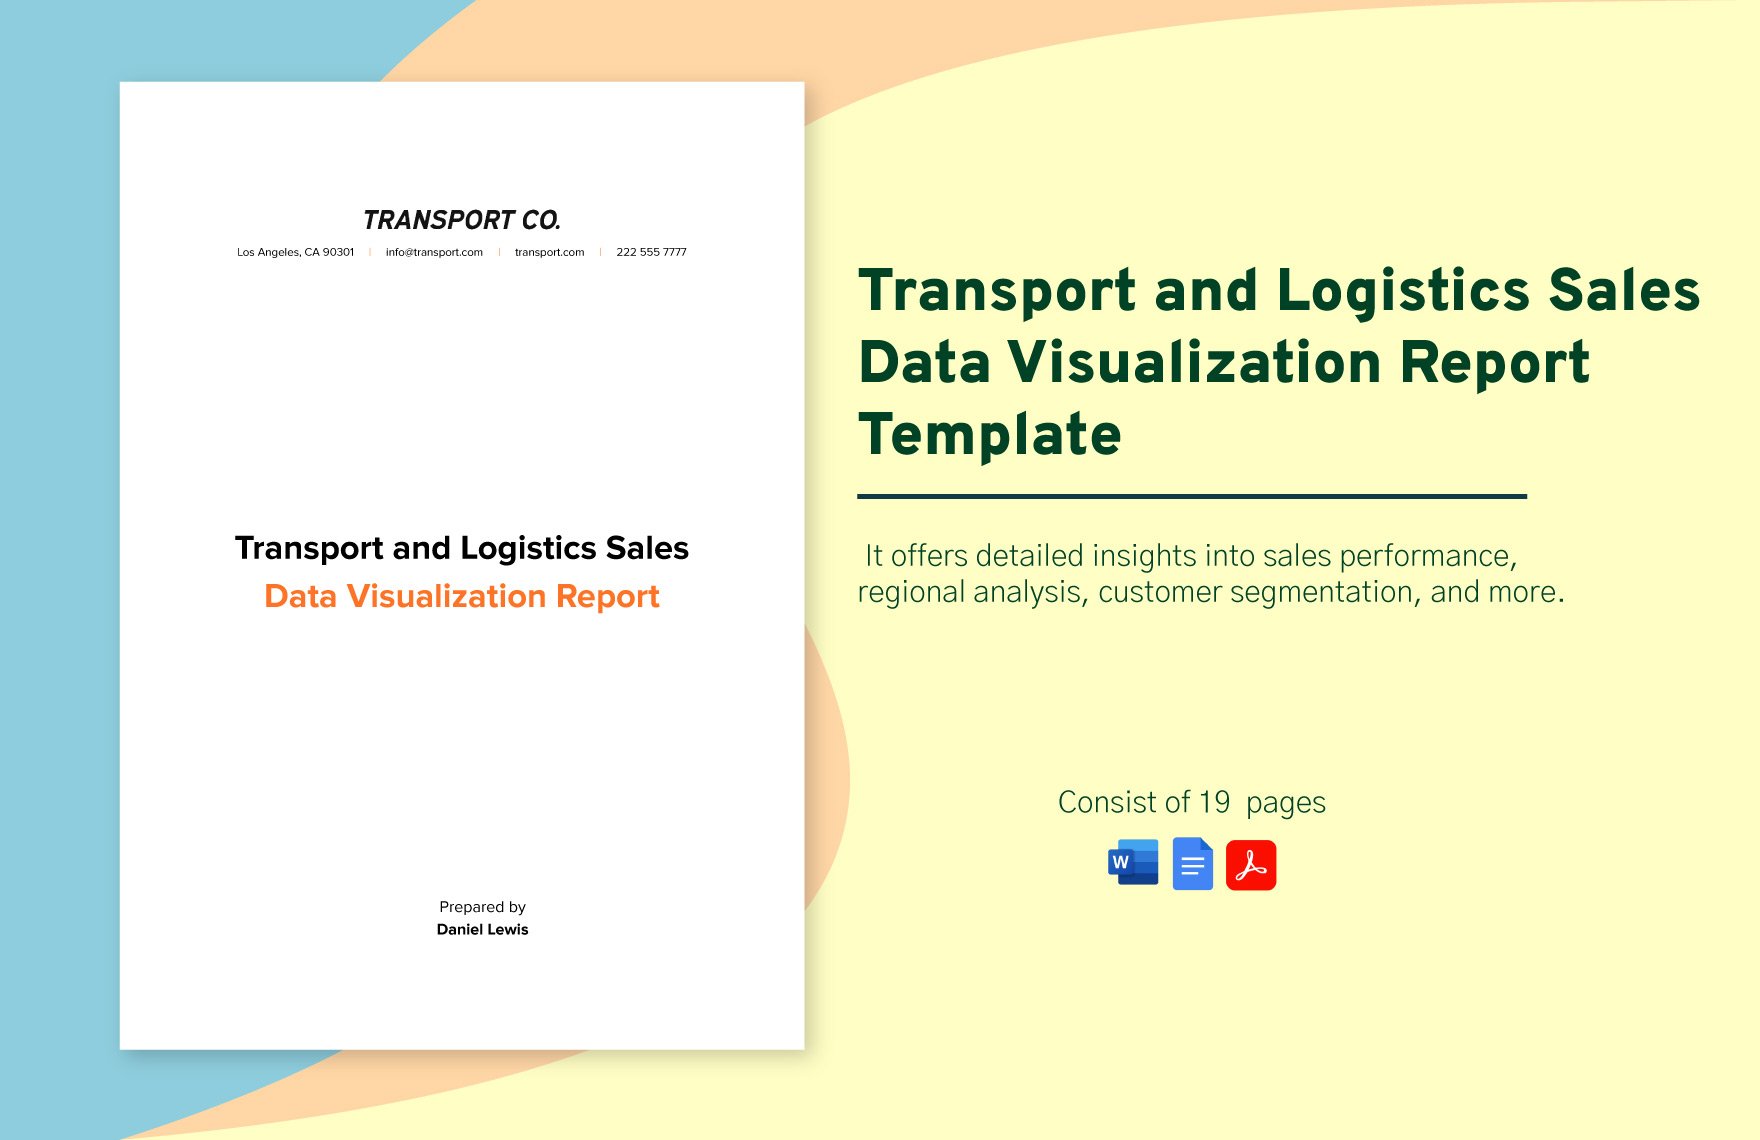 Transport and Logistics Sales Data Visualization Report Template